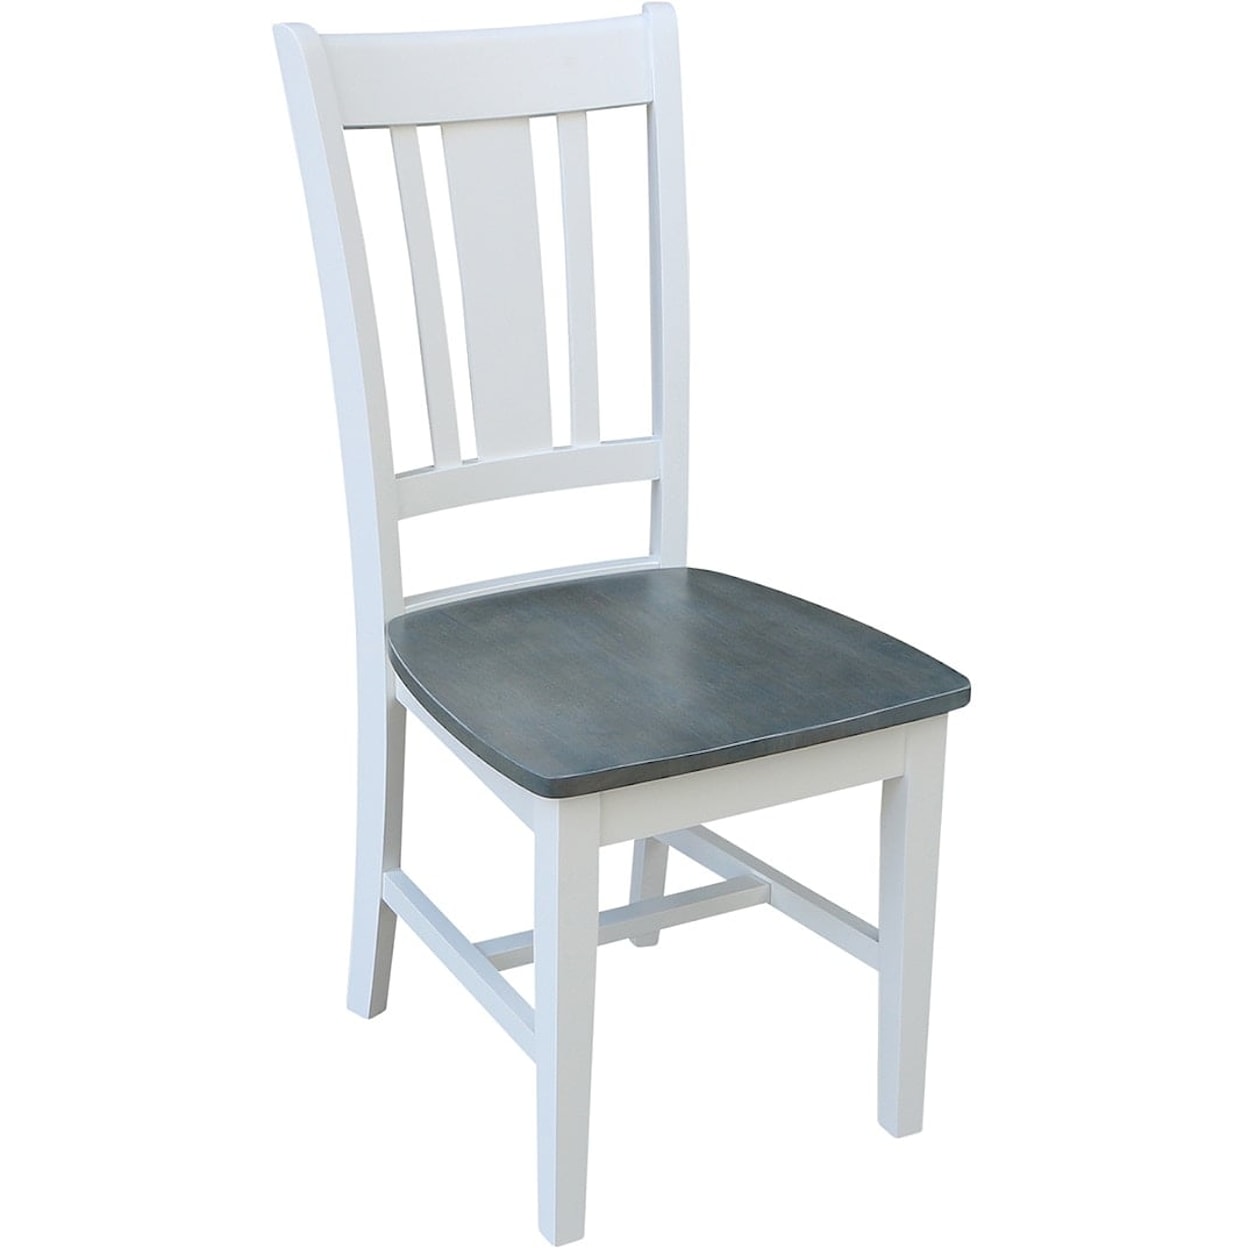 John Thomas Dining Essentials Dining Chair in Heather Gray / White